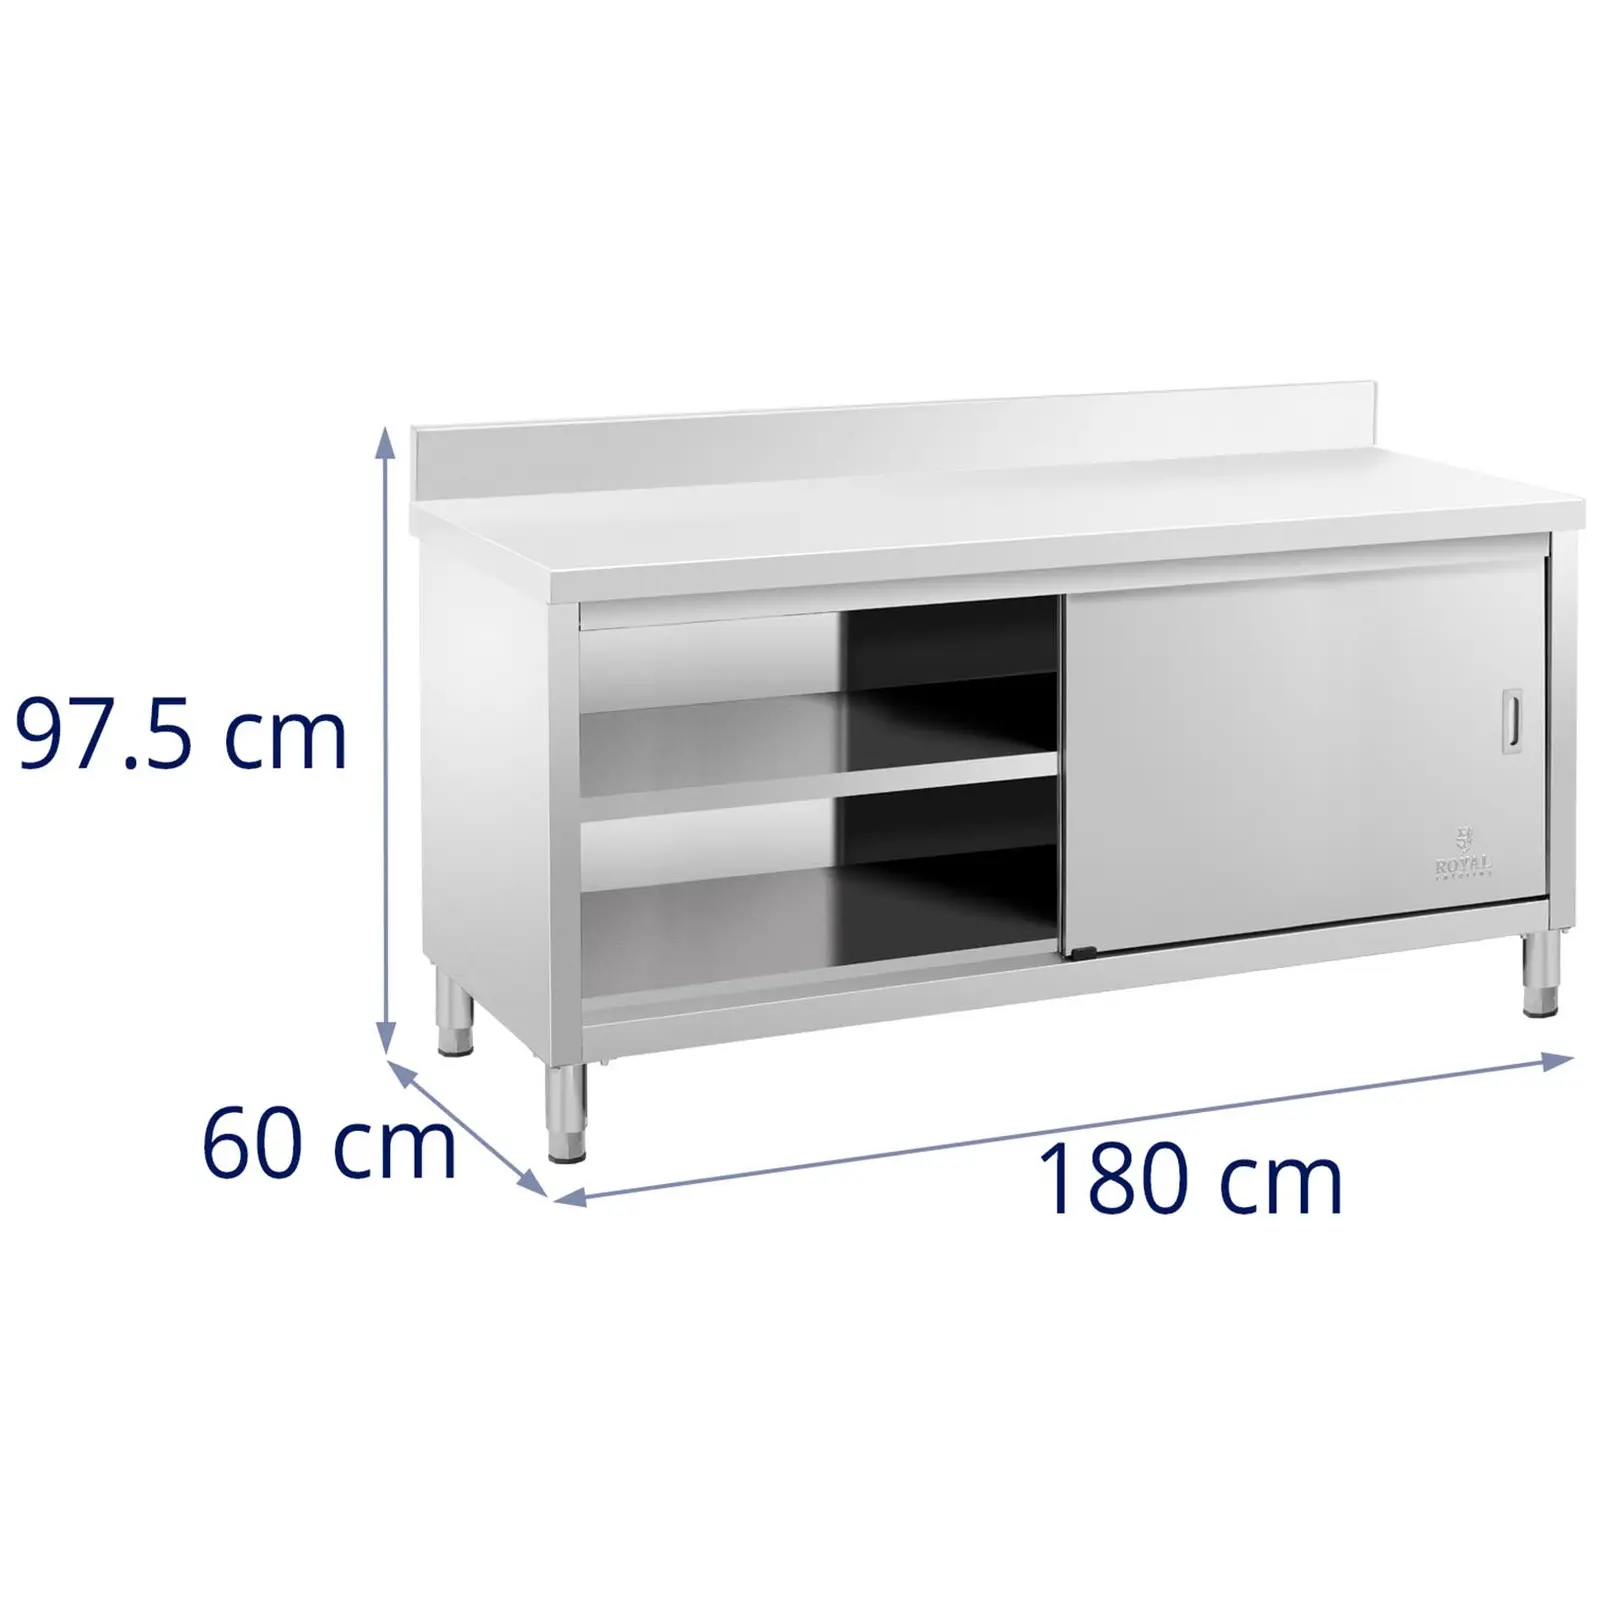 Work Cabinet - upstand - 180 x 60 cm - 600 kg load capacity